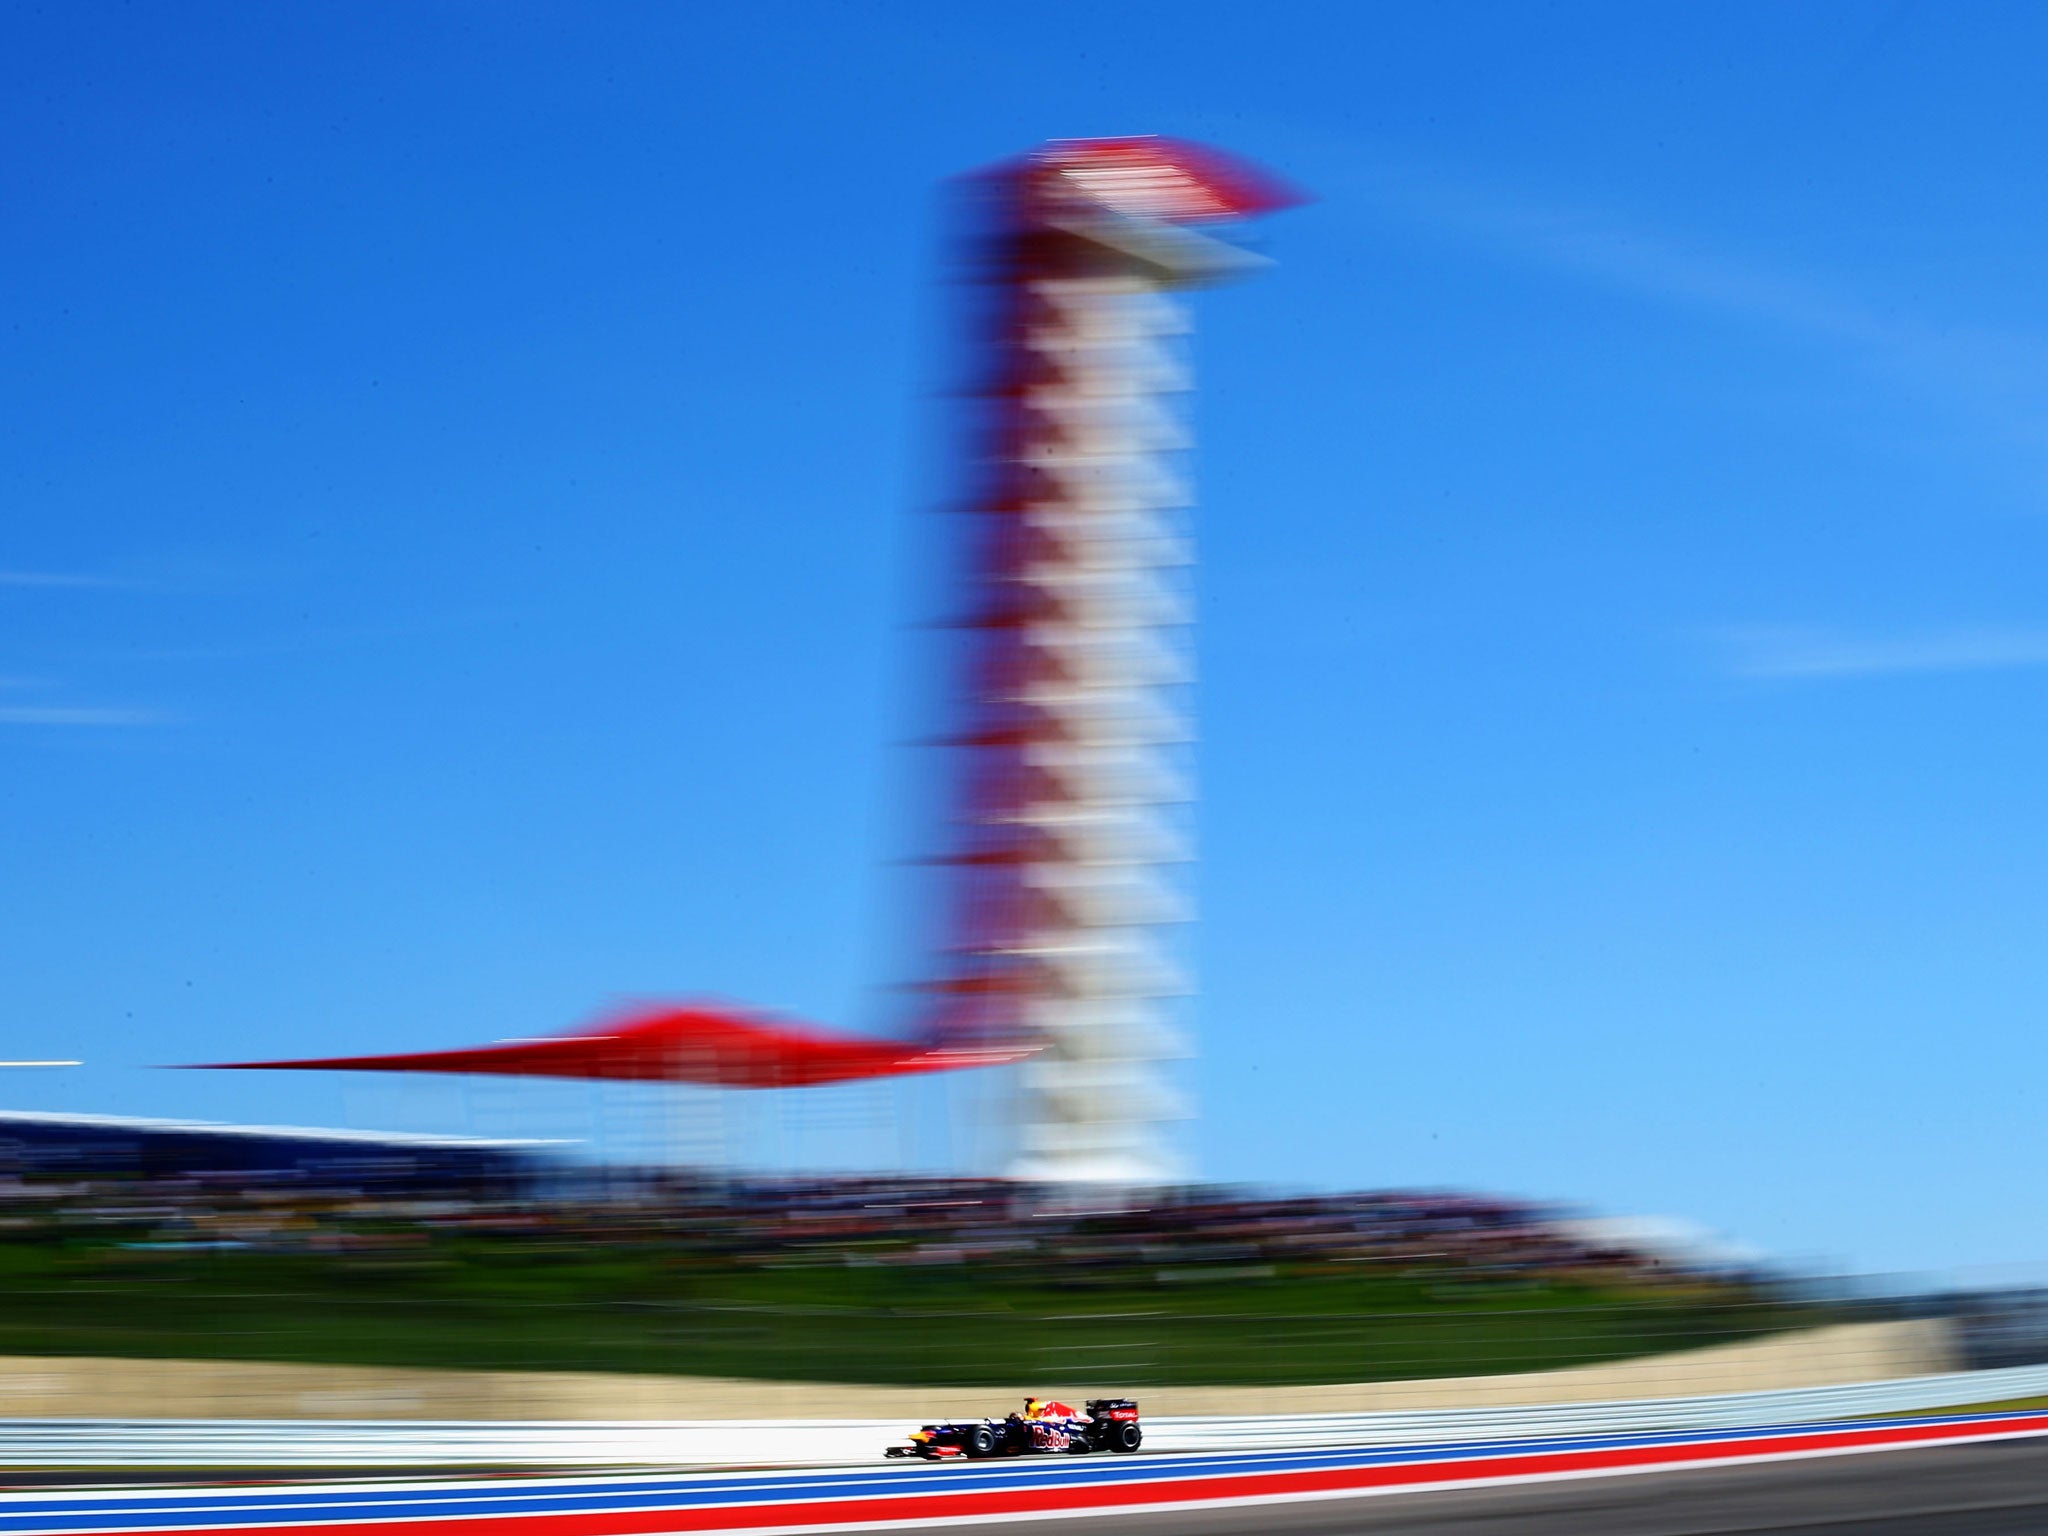 Sebastian Vettel on his way to finishing first during qualifying for the United States Formula One Grand Prix at the Circuit of the Americas